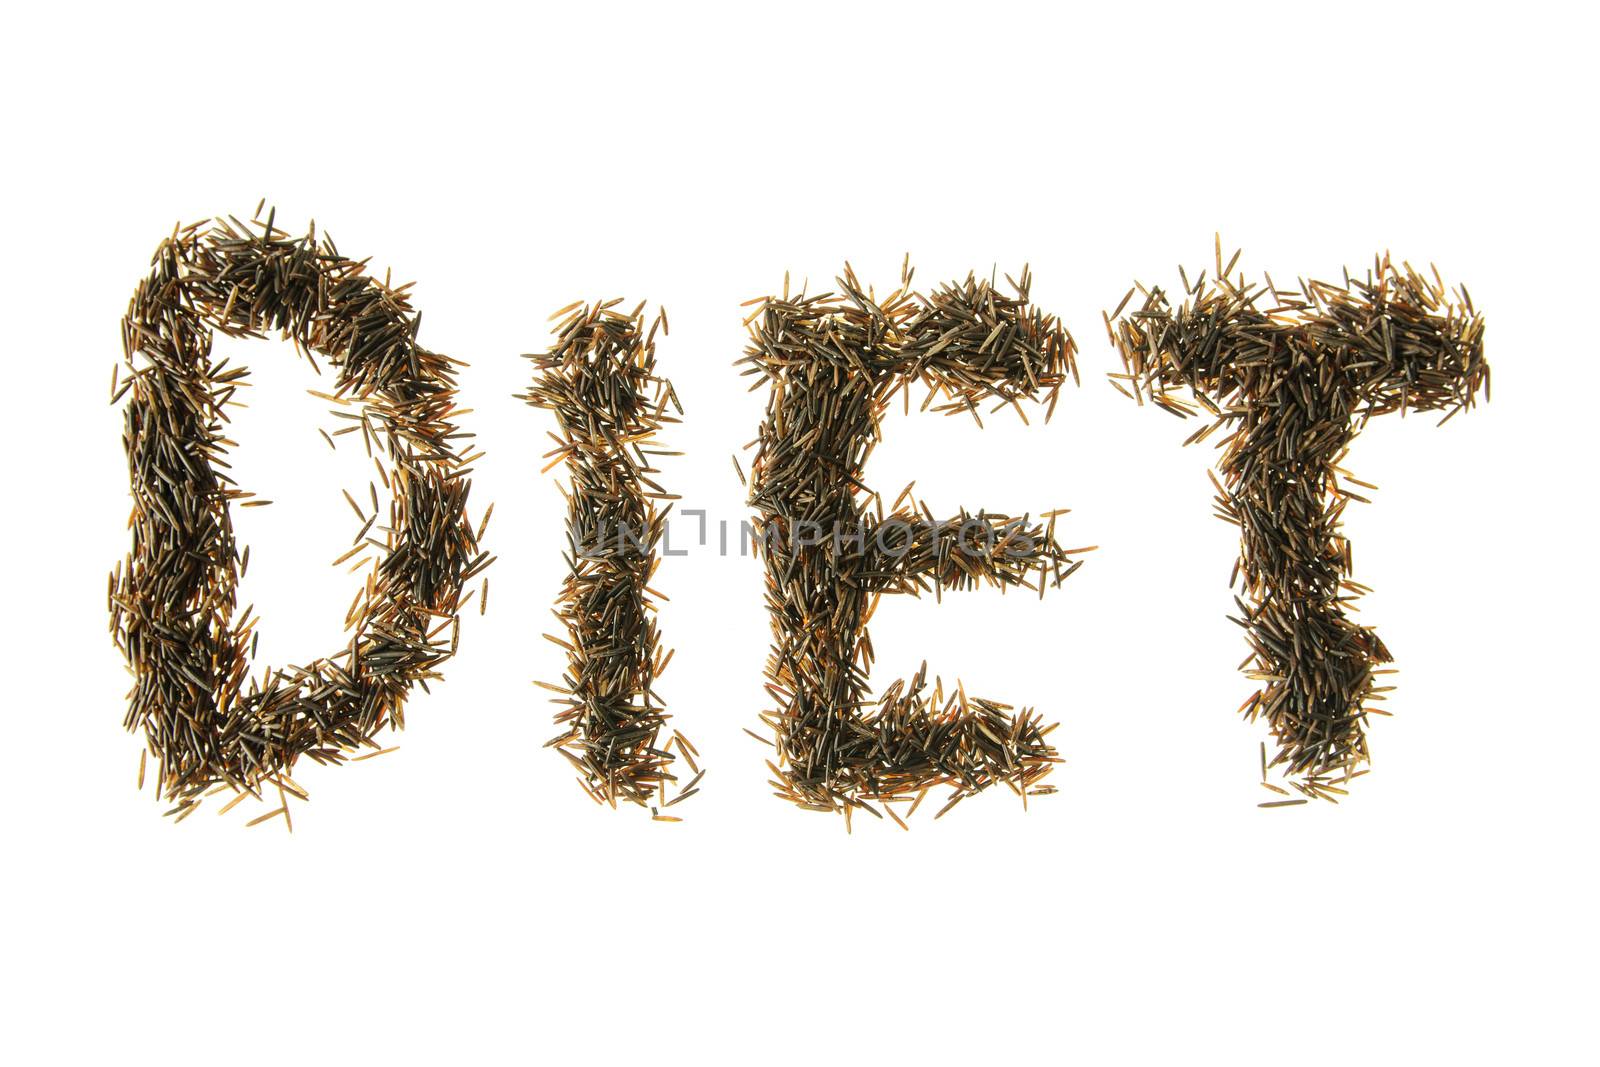 Wild Rice Spelling Diet by dragon_fang